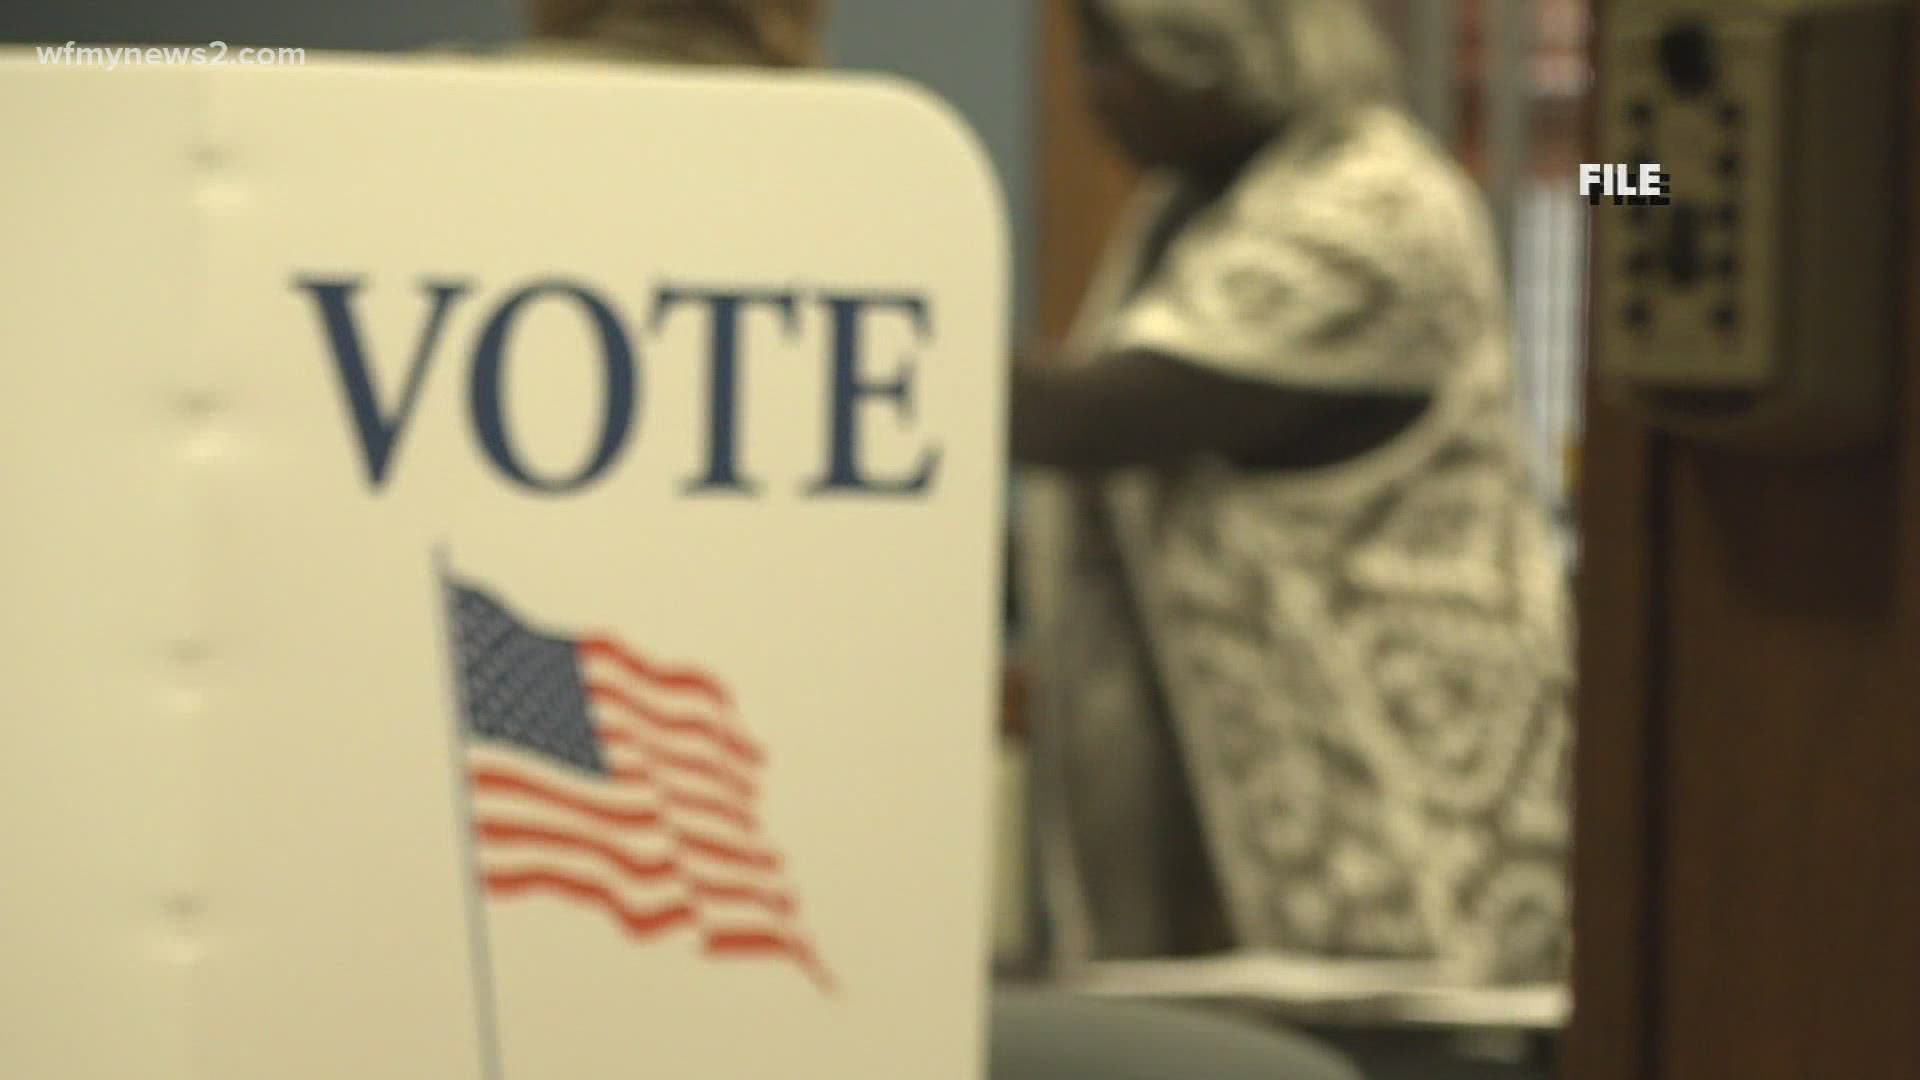 State Board of Elections ensures safety for poll workers as they try to recruit more.